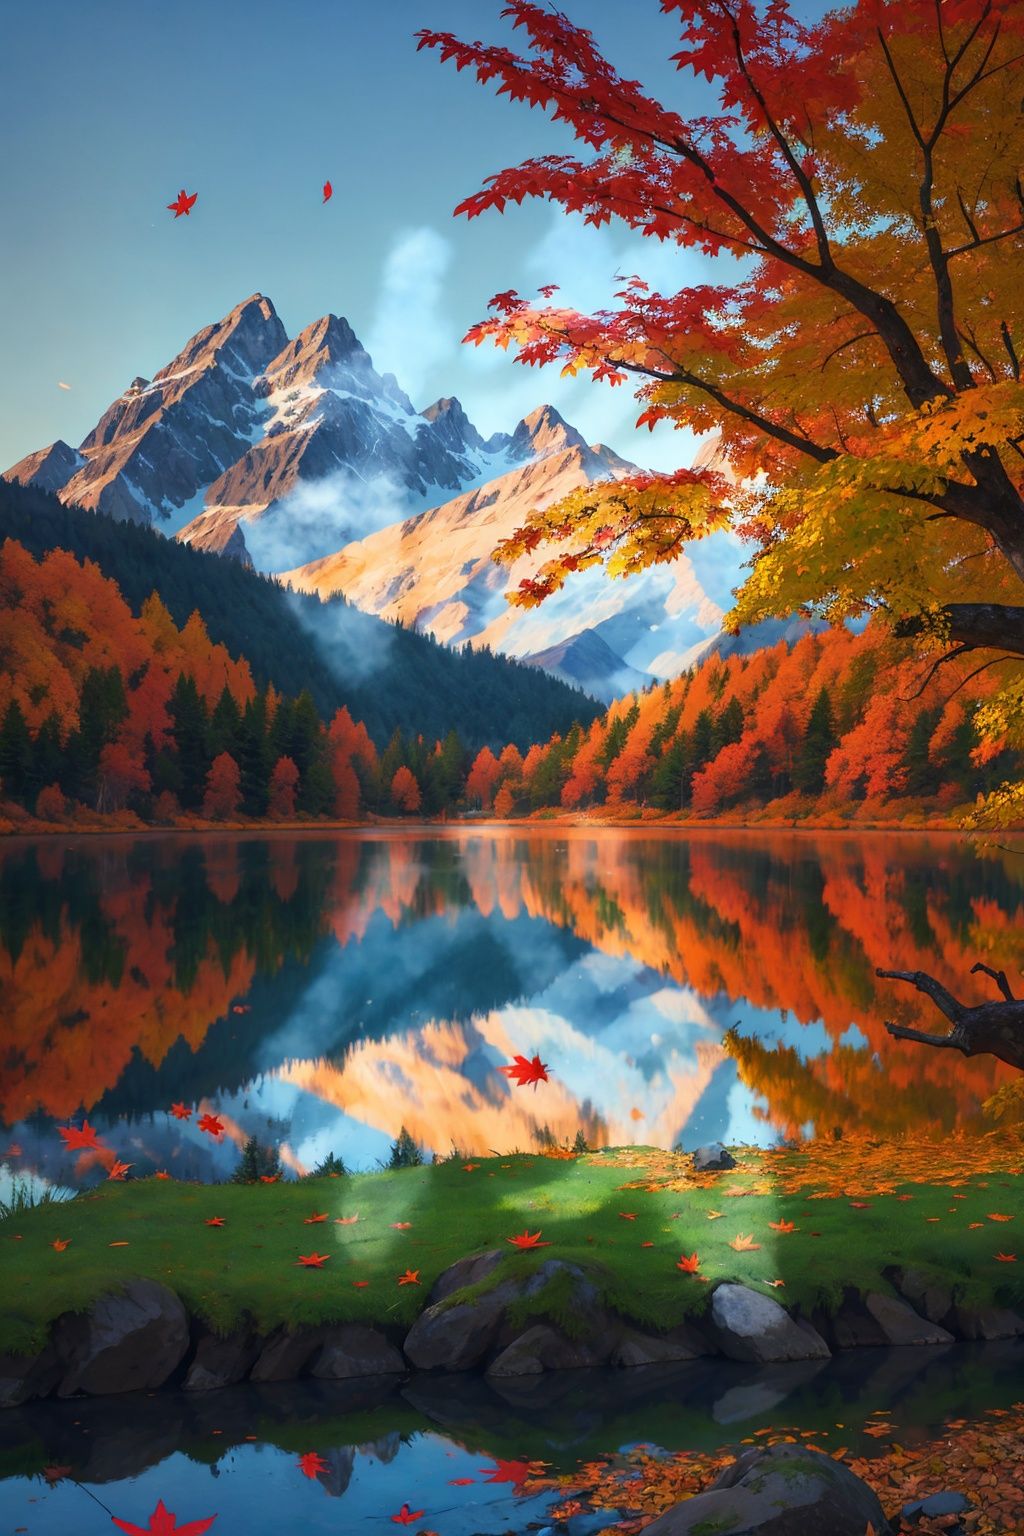 morning dew in autumn, maple leaves, serene lake surface, mountains, open-air cafe, cabin, campfire, fishing, mountain trails, autumn wedding